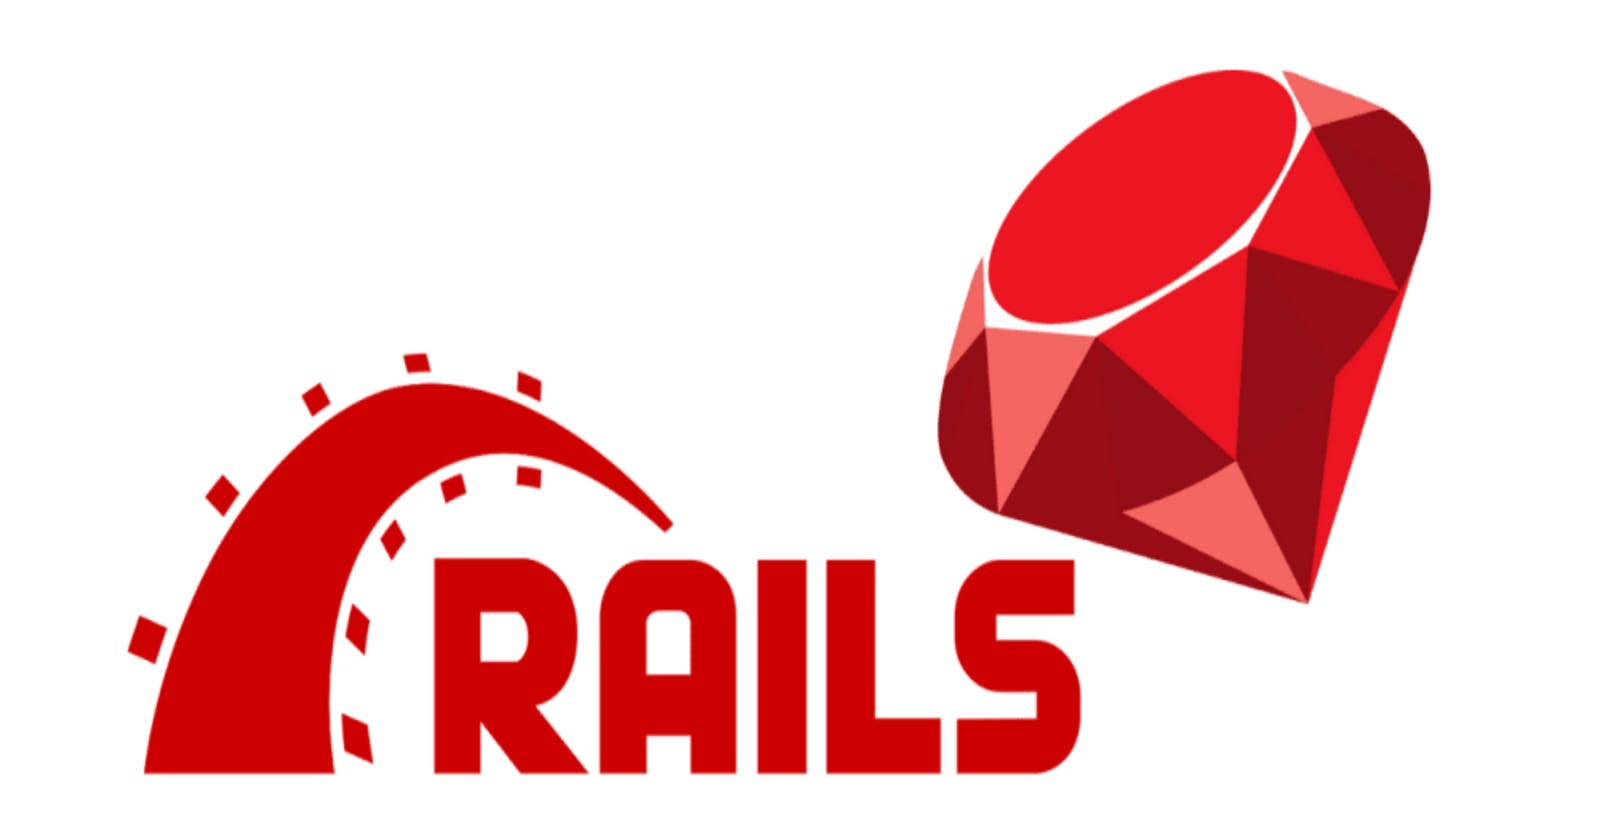 Getting Started With Rails Devise Token Auth